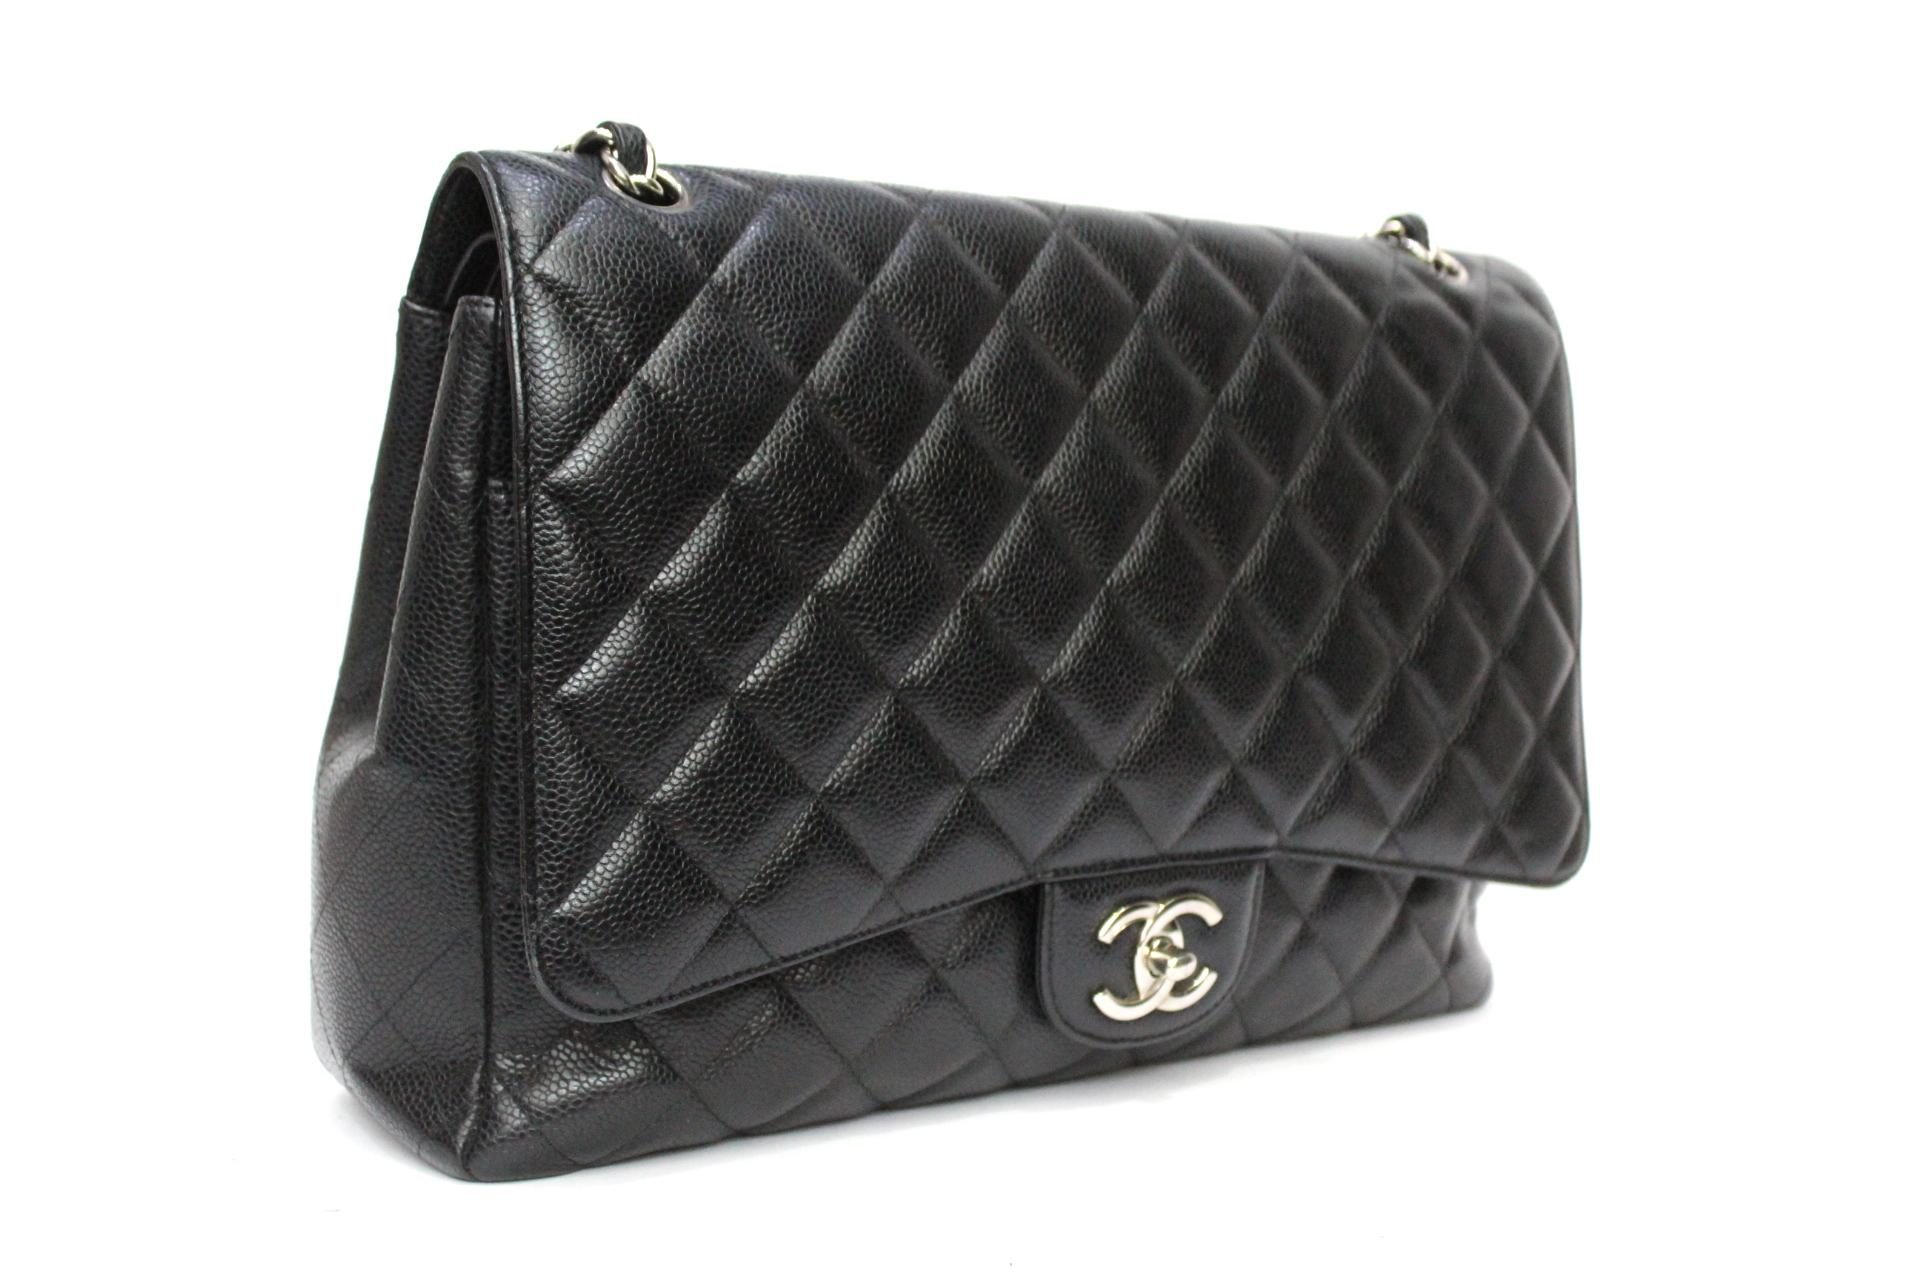 Chanel Maxi Jumbo Double-Flap in hammered leather with silver hardware.

Closing with classic silver CC logo and chain and leather shoulder strap.

Internally large. It seems in perfect conditions. YEAR 2010/2011.